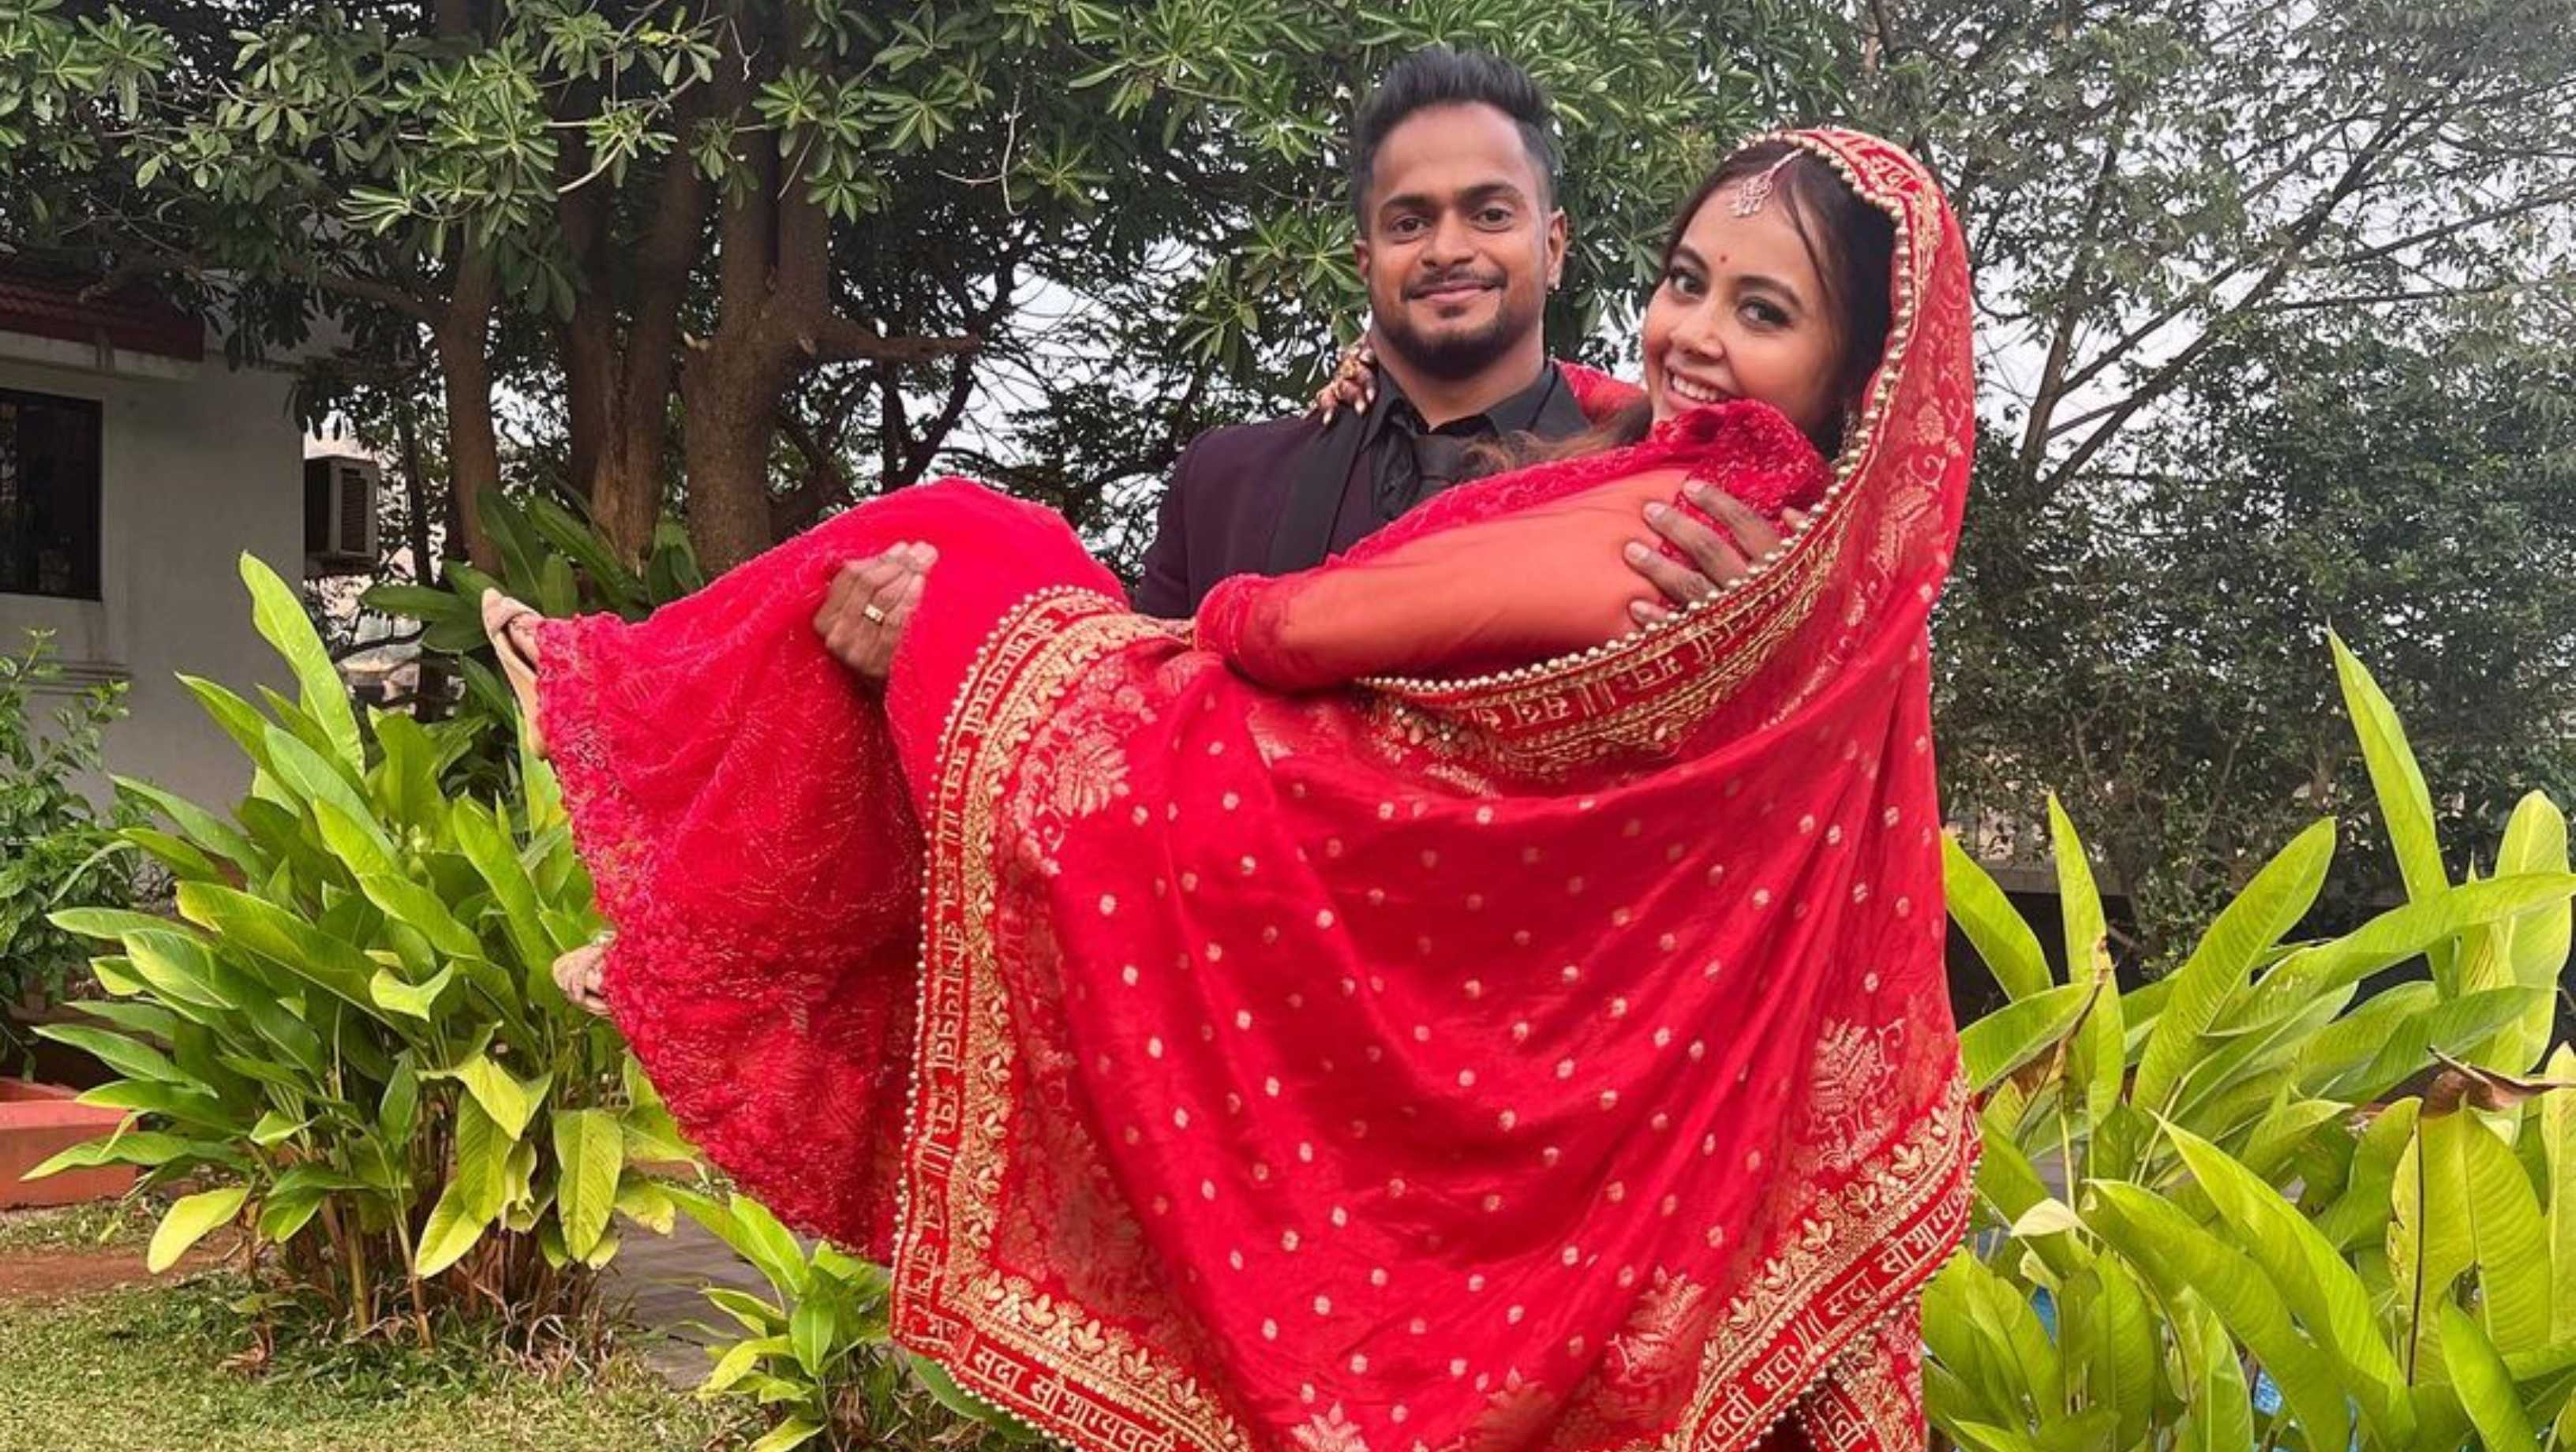 ‘I am taken’: Devoleena Bhattacharjee finally introduces fans to her mystery groom with cute wedding photos